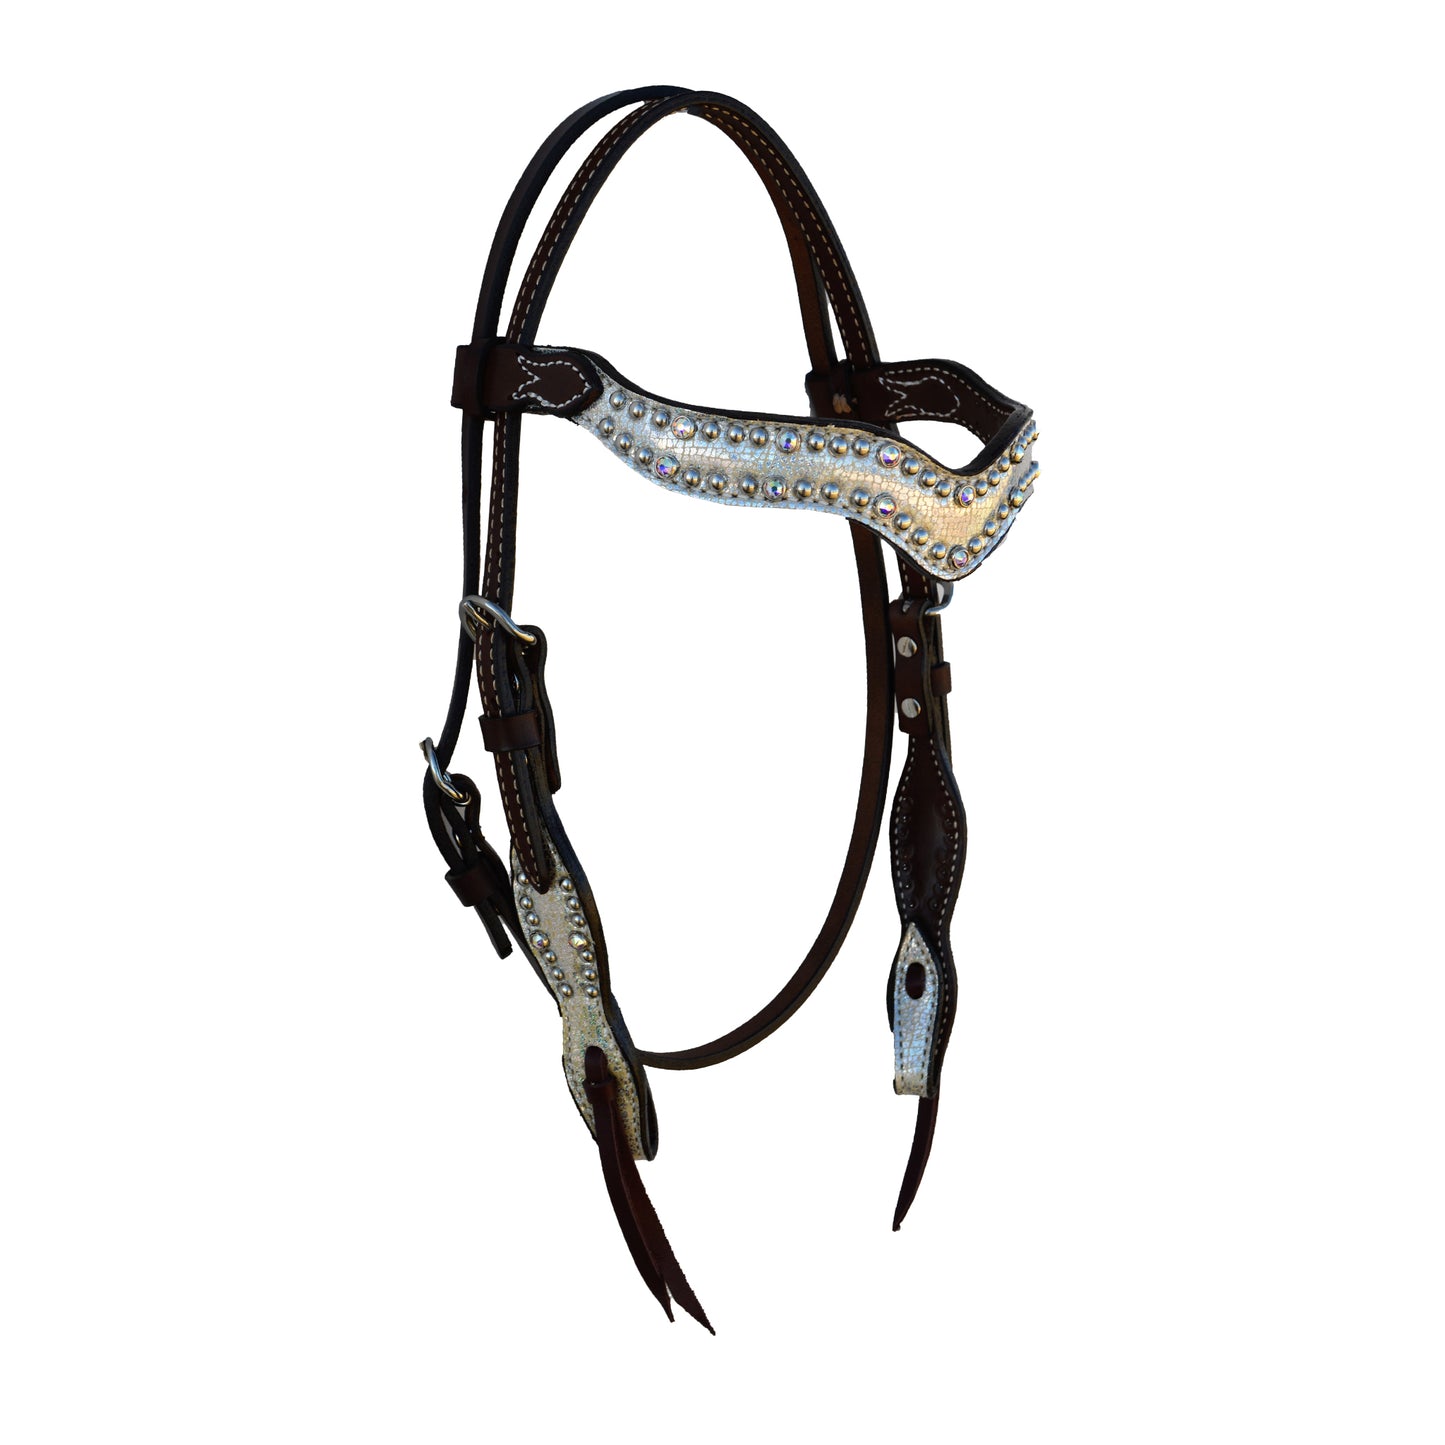 1-1/2" Wave browband headstall chocolate leather holographic overlay with Swarovski crystals and SS spots.